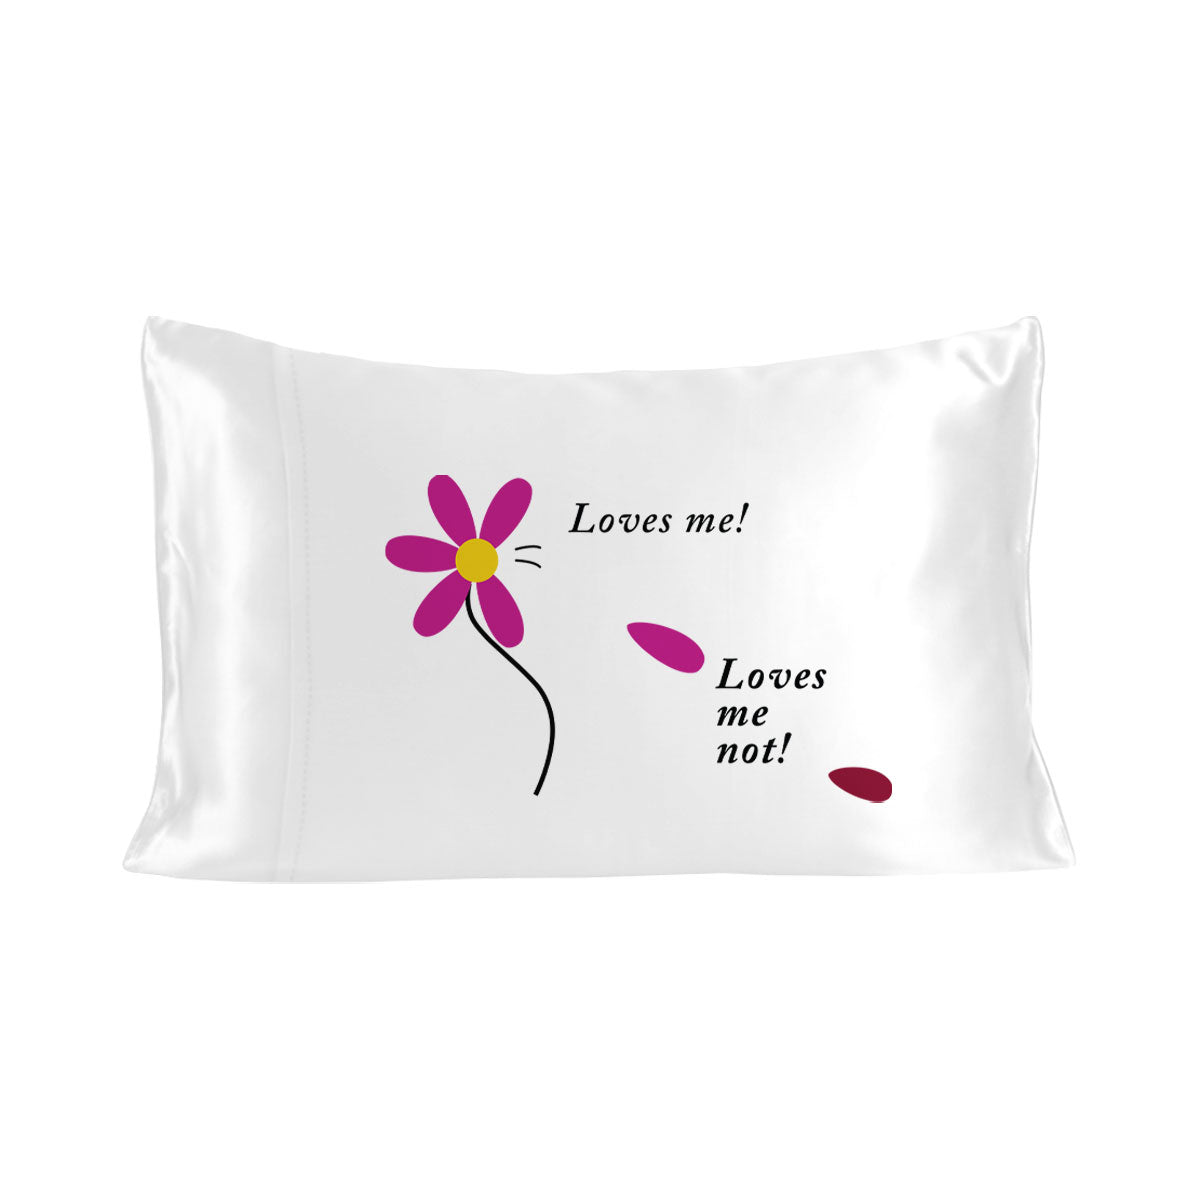 White Satin Silky Pillow Covers Set, Luxury Soft, Smooth Feel with Love Messages from "Love Me Love Me Not" Stoa Paris Pillow Tok Collection